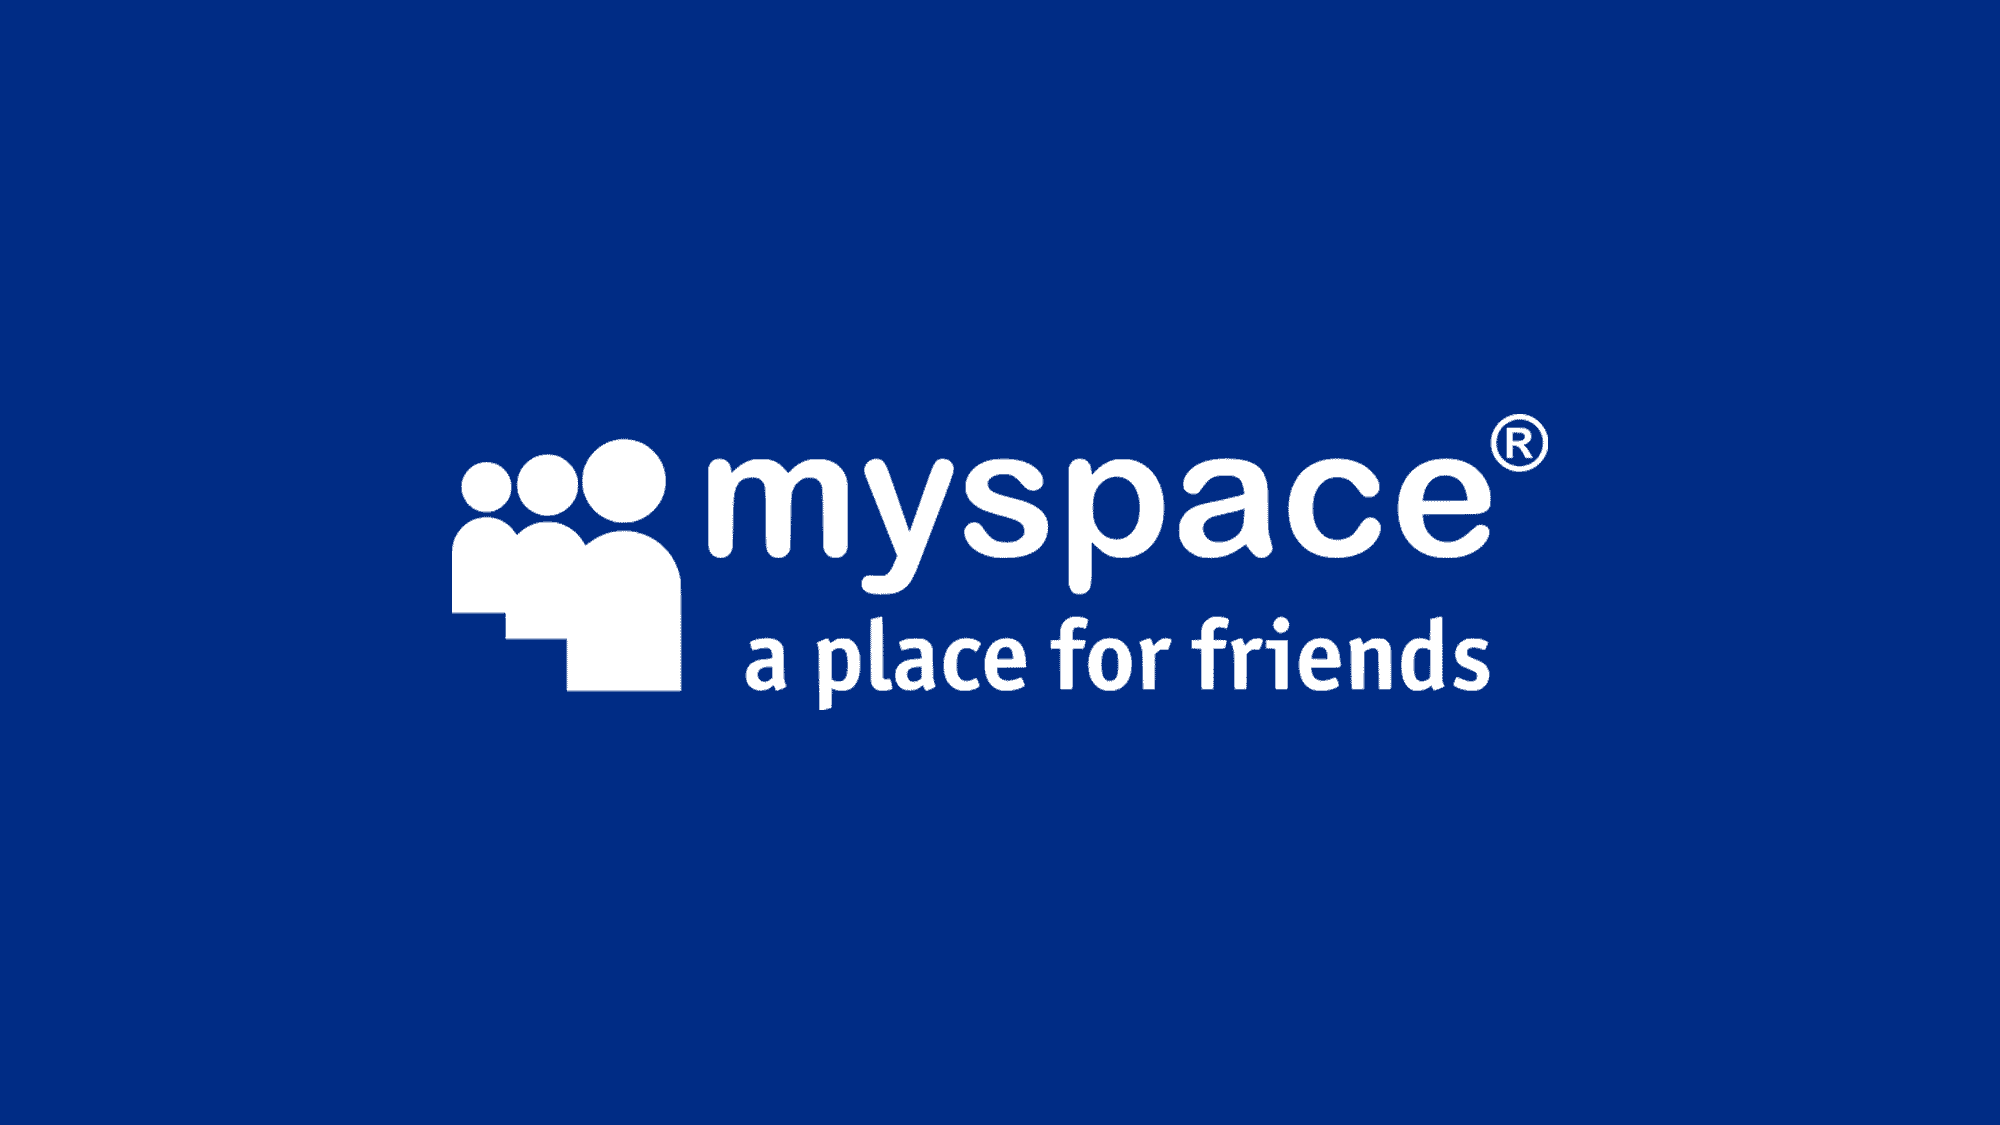 Photobucket Is Responsible For 73% of Photo Related MySpace Traffic (2007)